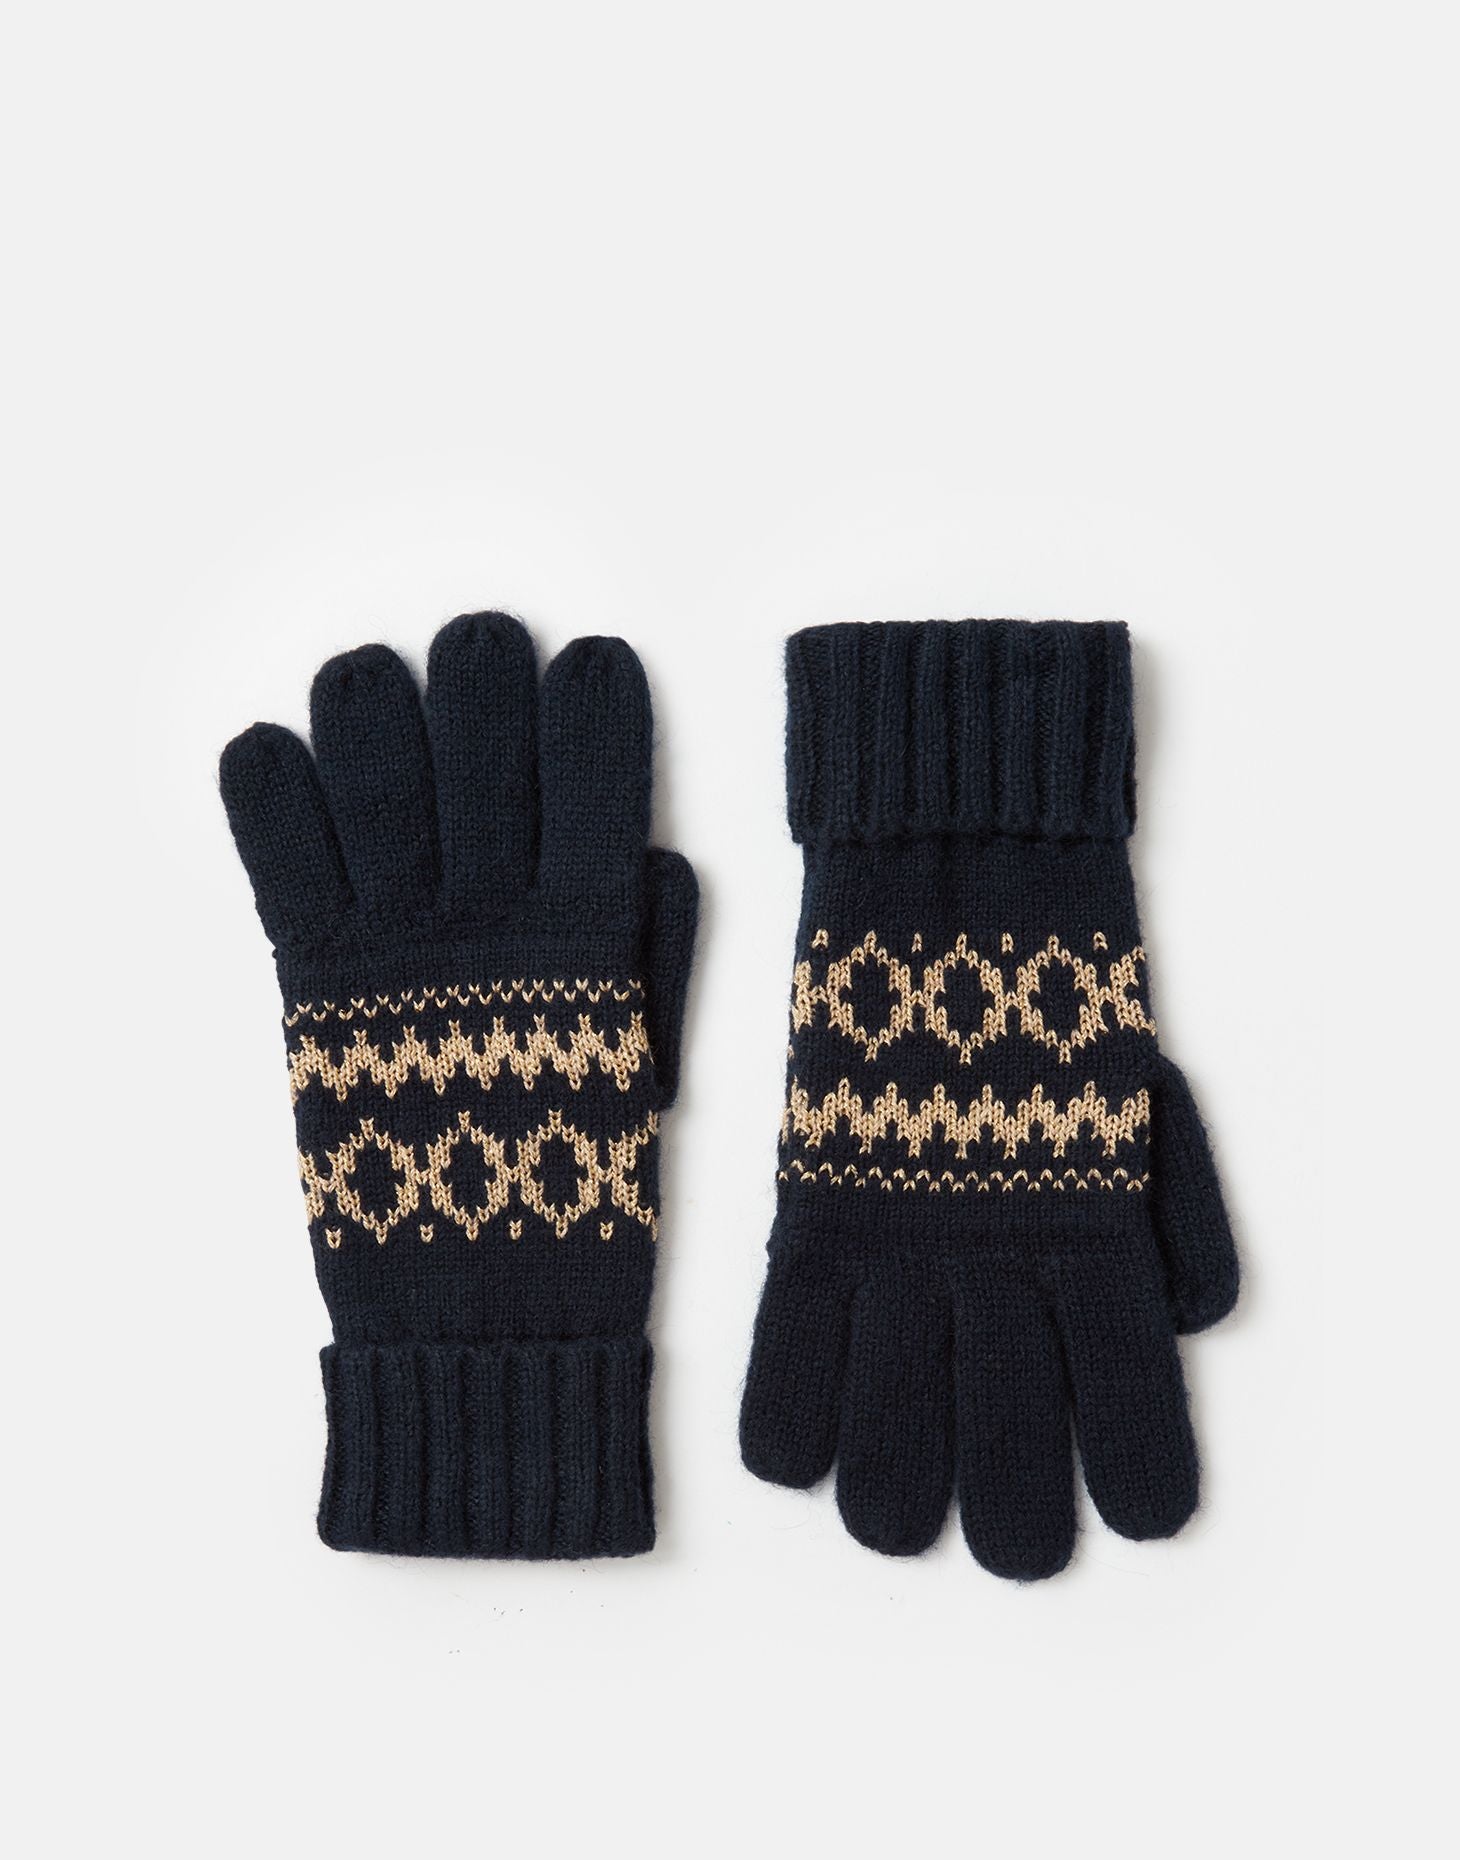 Joules Shetland Glove Womens Gloves - French Navy